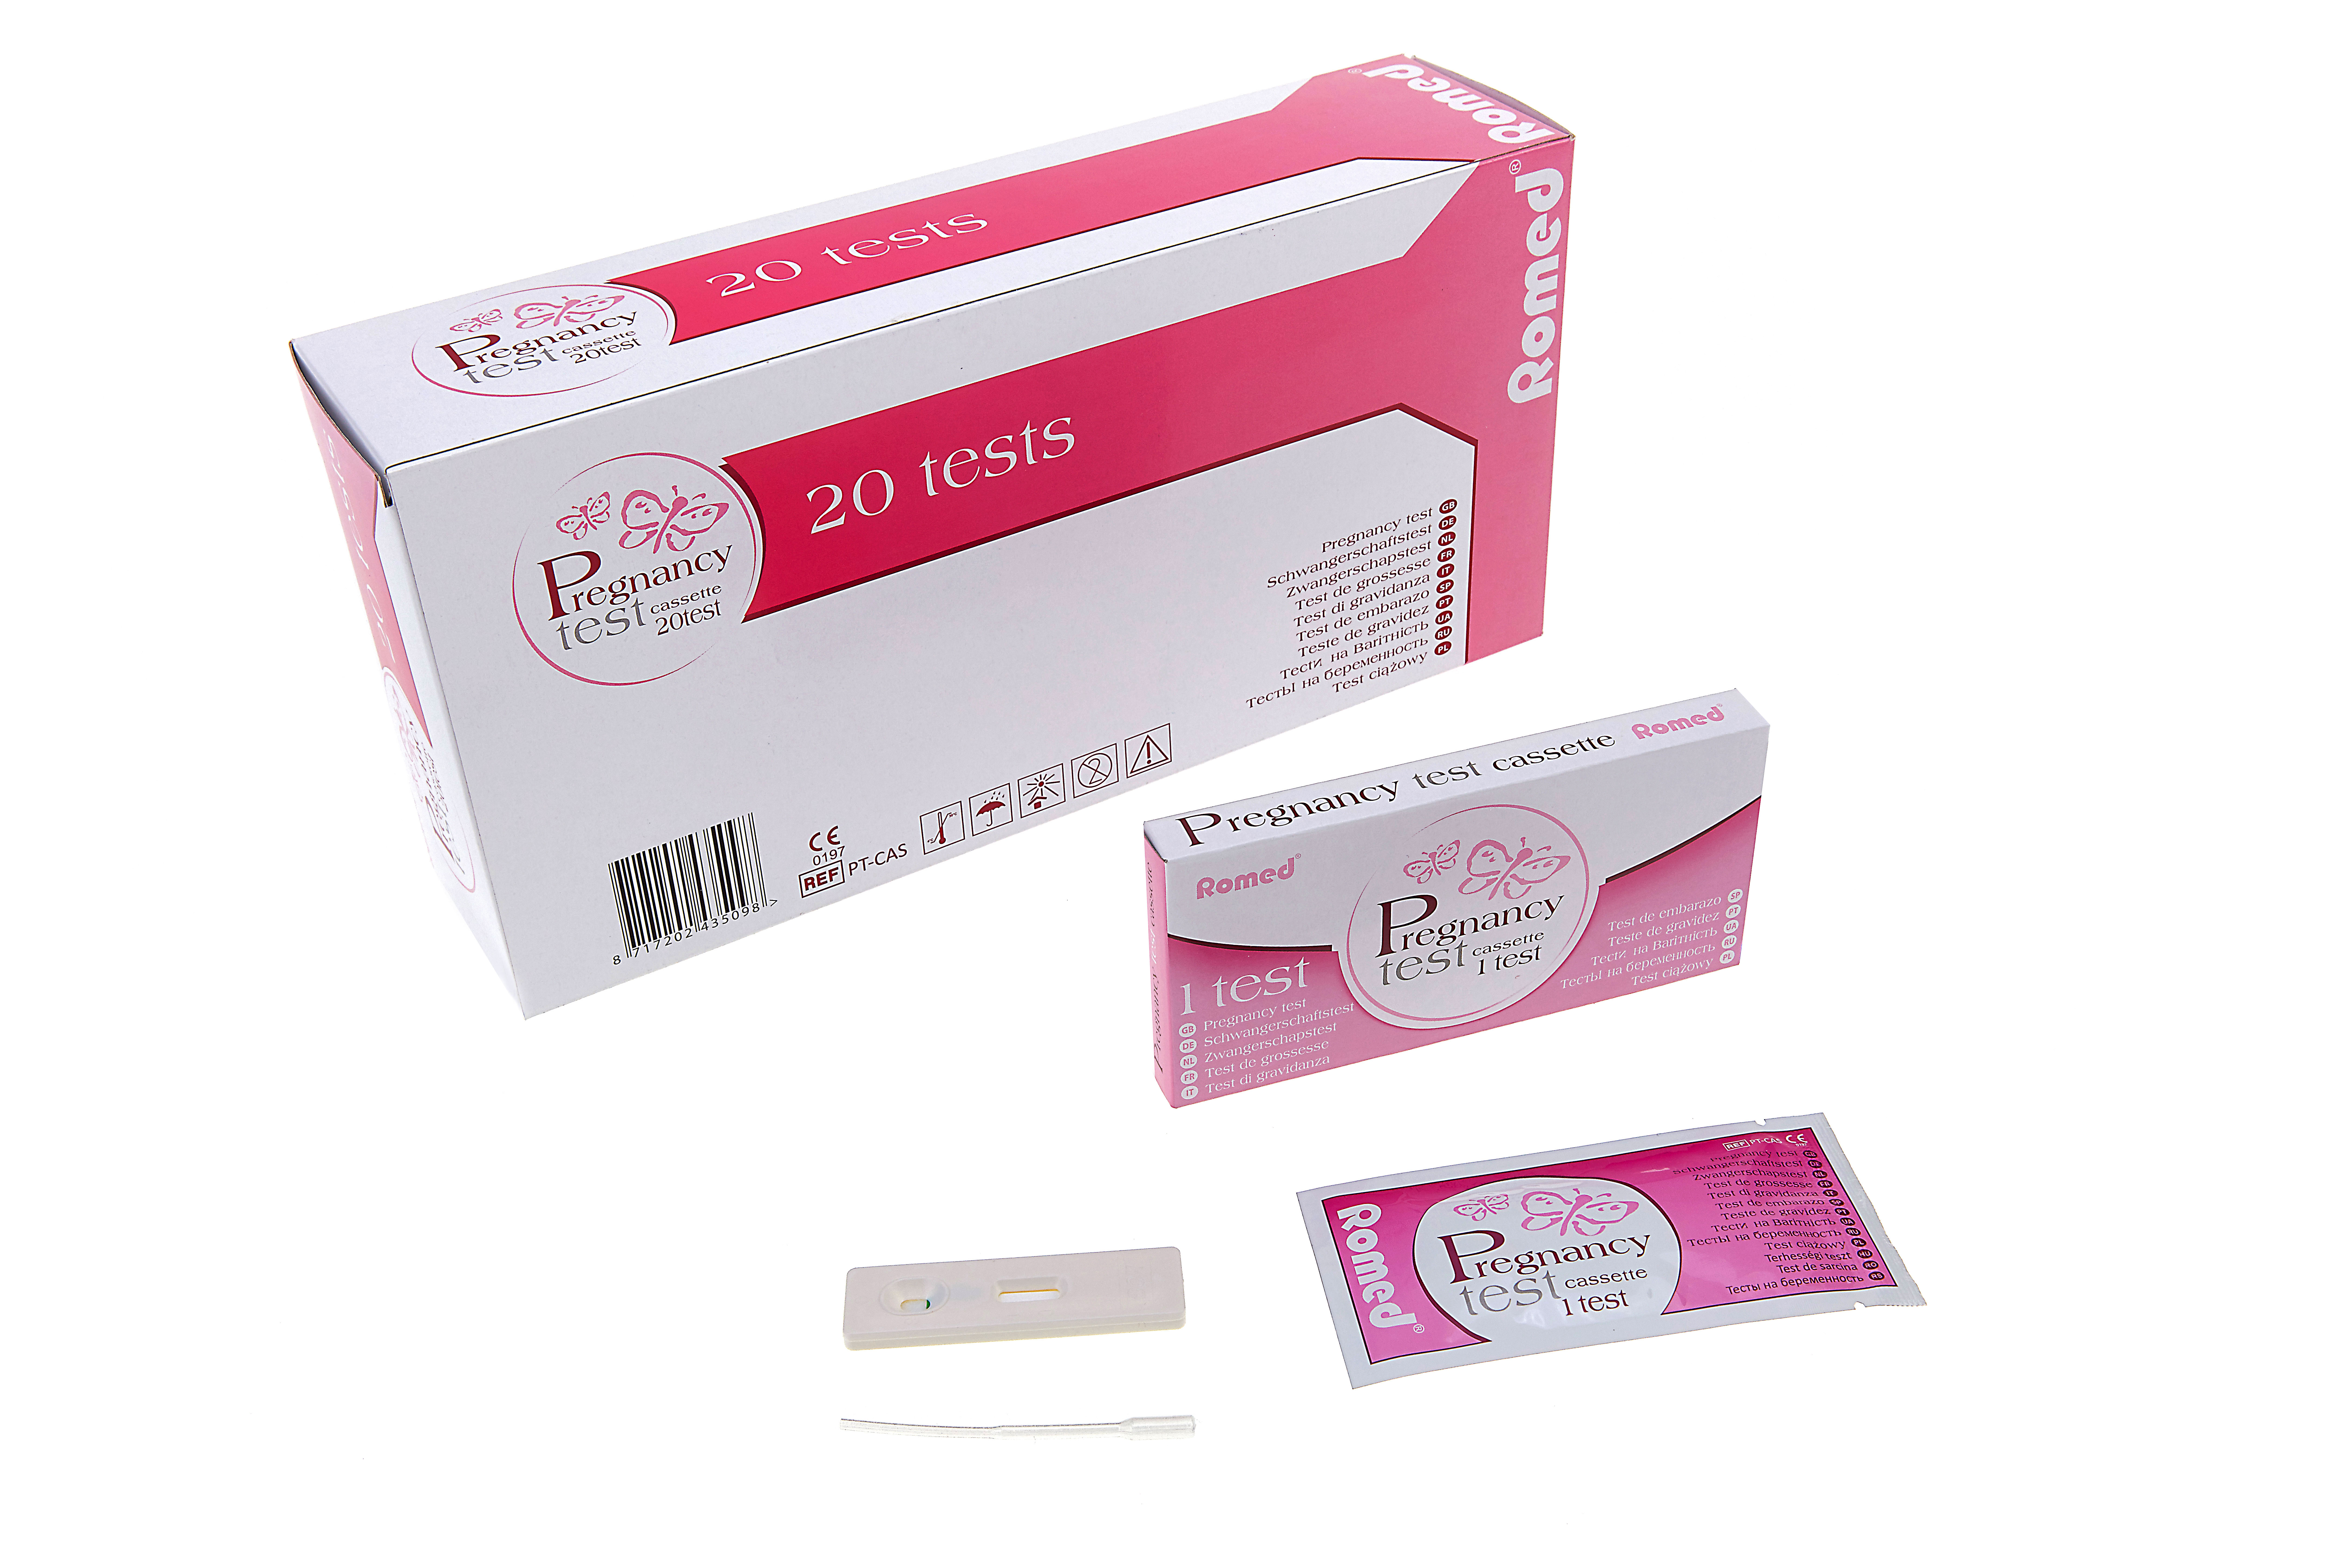 PT-CAS Romed pregnancy tests, cassette type, packed per piece in a box, per 20 pcs in a middle box, 25 x 20 pcs = 500 in a carton.